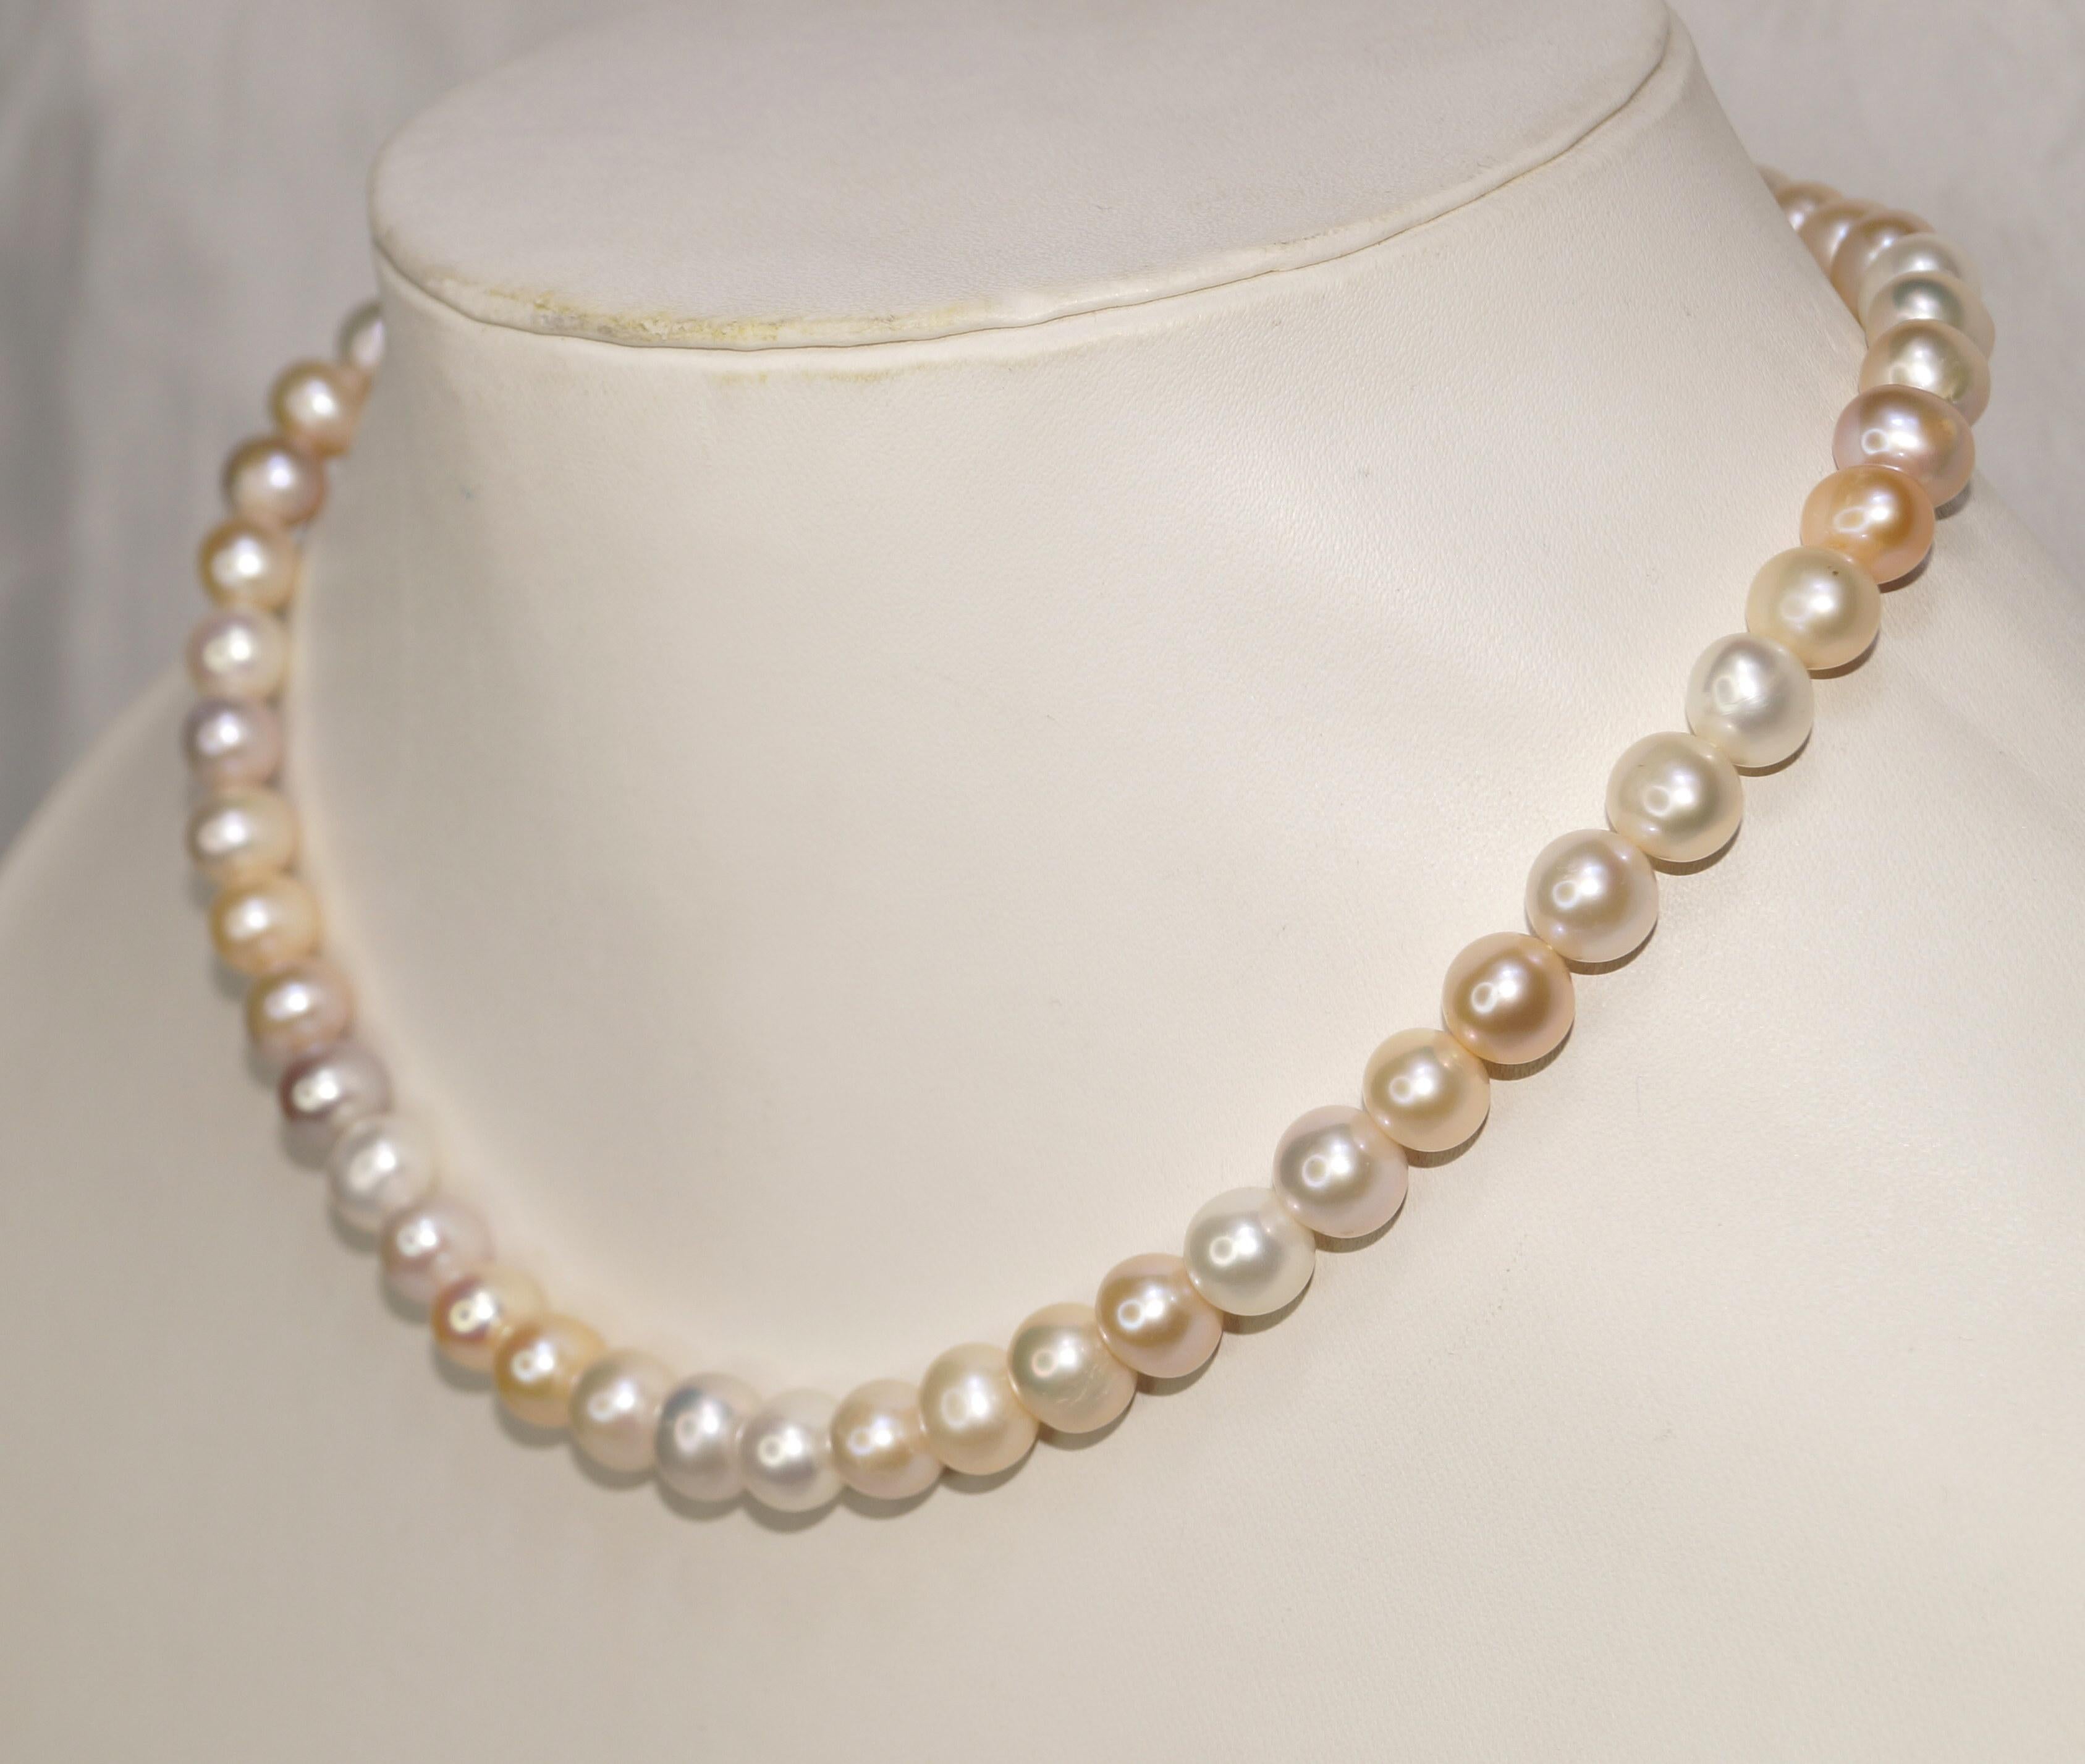 Women's or Men's 14k Gold Golden Cream mix Pearl necklace 14mm Freshwater Round Pearl necklace